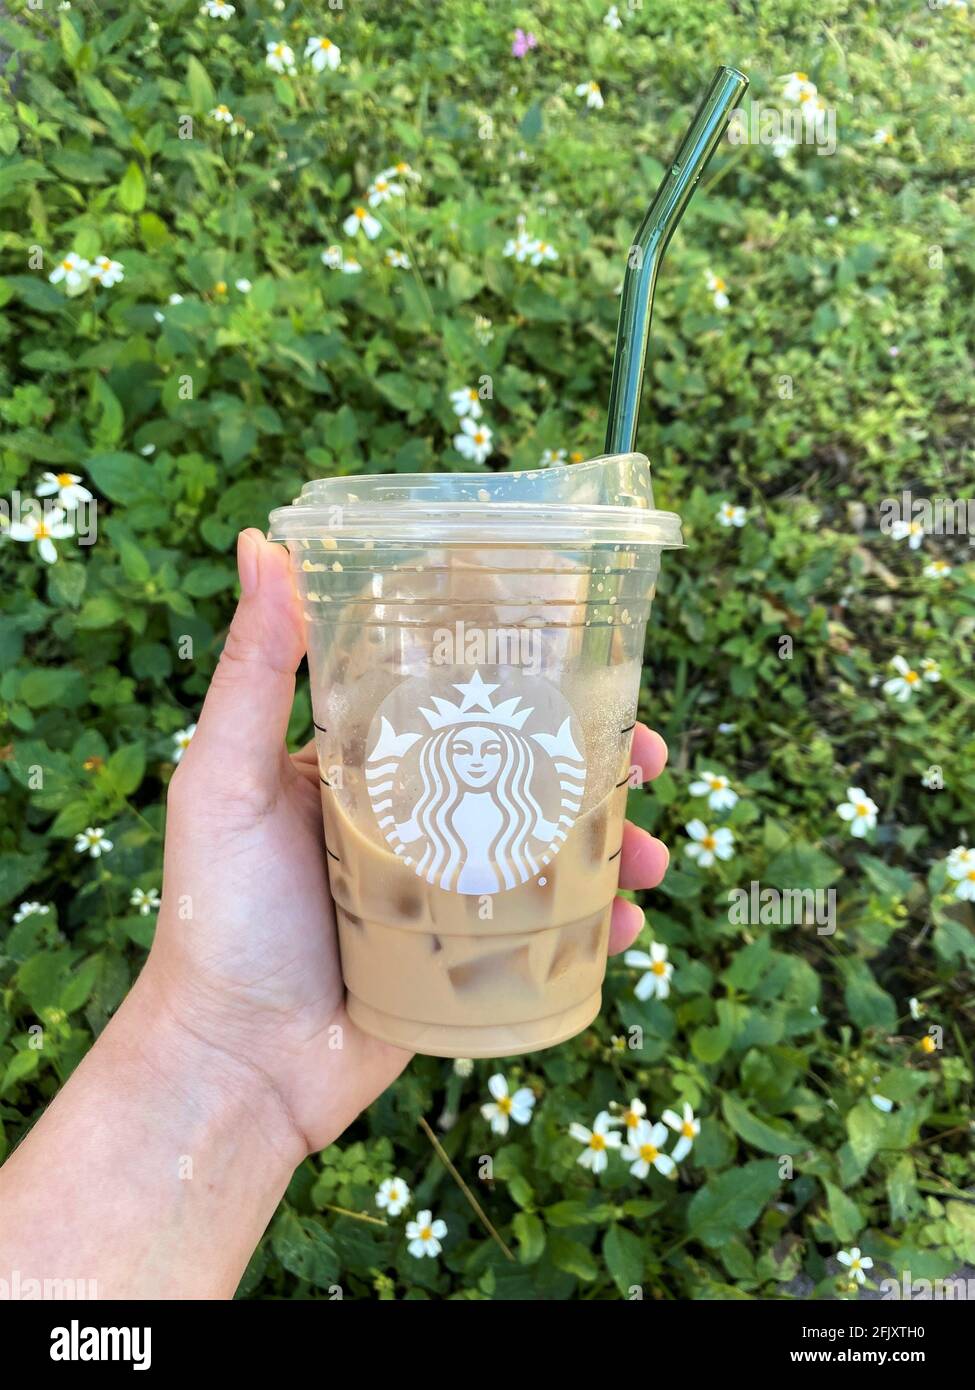 Holding a glass straw in a Starbucks coffee cup aimed to reduce the need of  single use plastic straws by using reusable straws. Green grass background  Stock Photo - Alamy